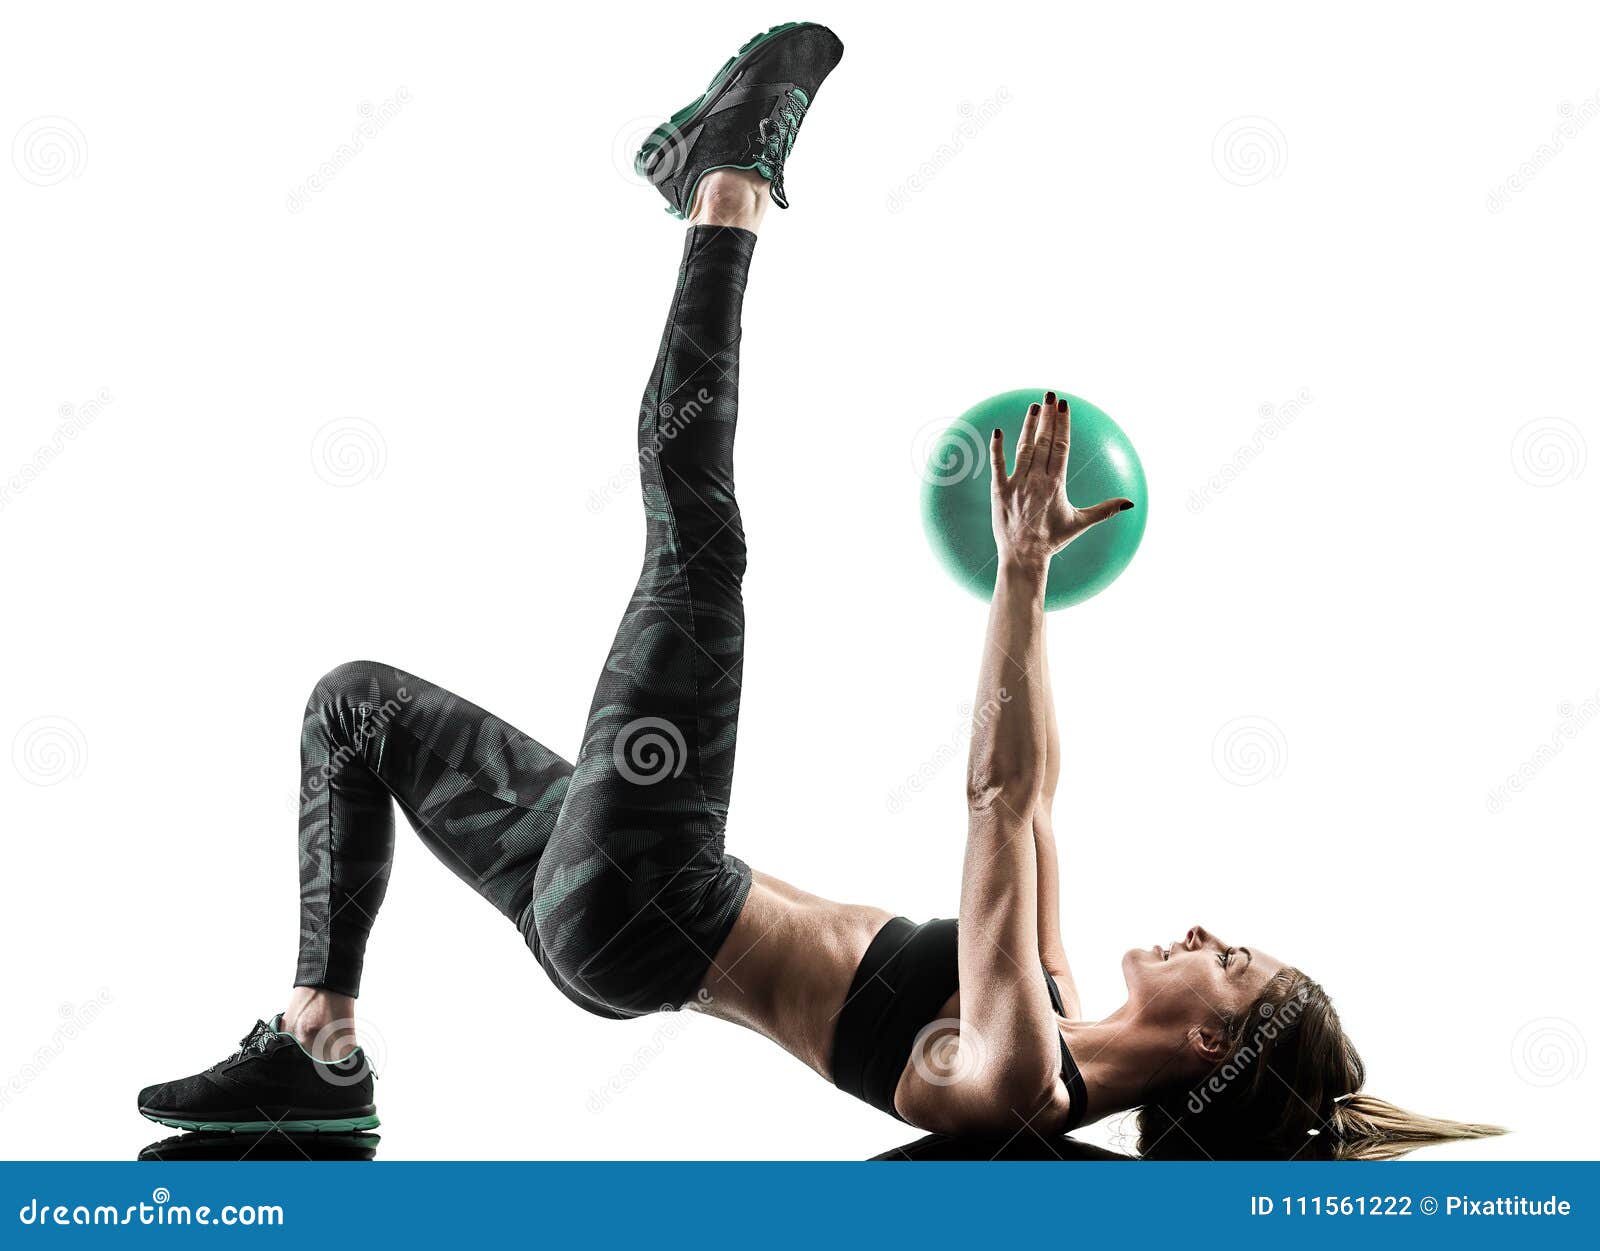 Woman Exercising Fitness Ball Workout Silhouette Stock Photo - Image of shadow, views: 50280918